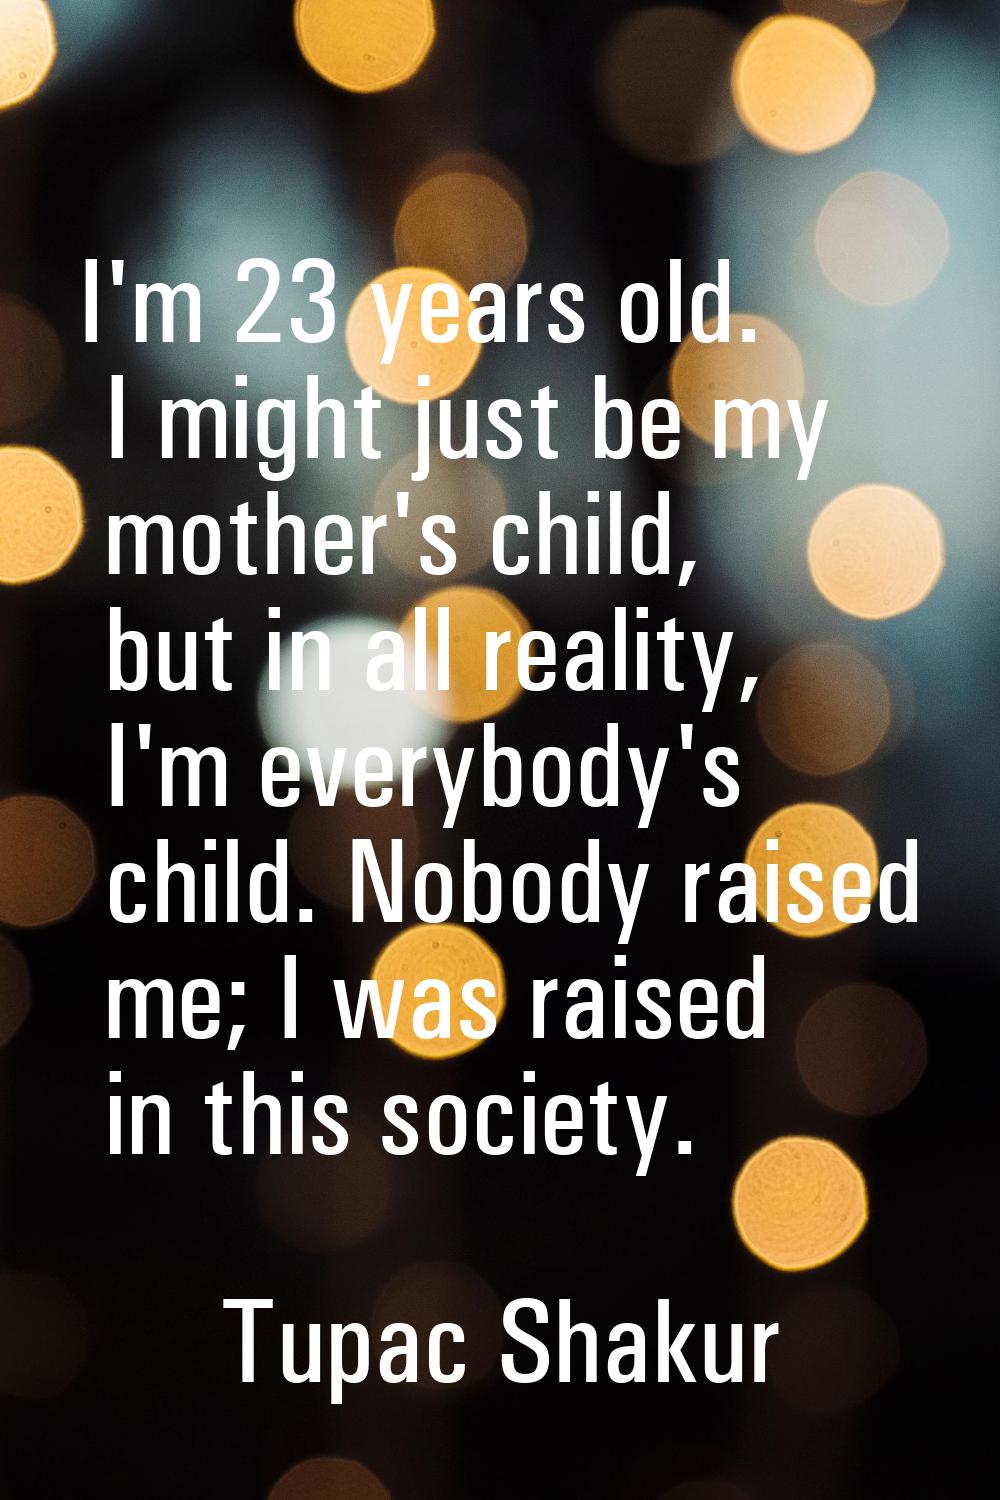 I'm 23 years old. I might just be my mother's child, but in all reality, I'm everybody's child. Nob